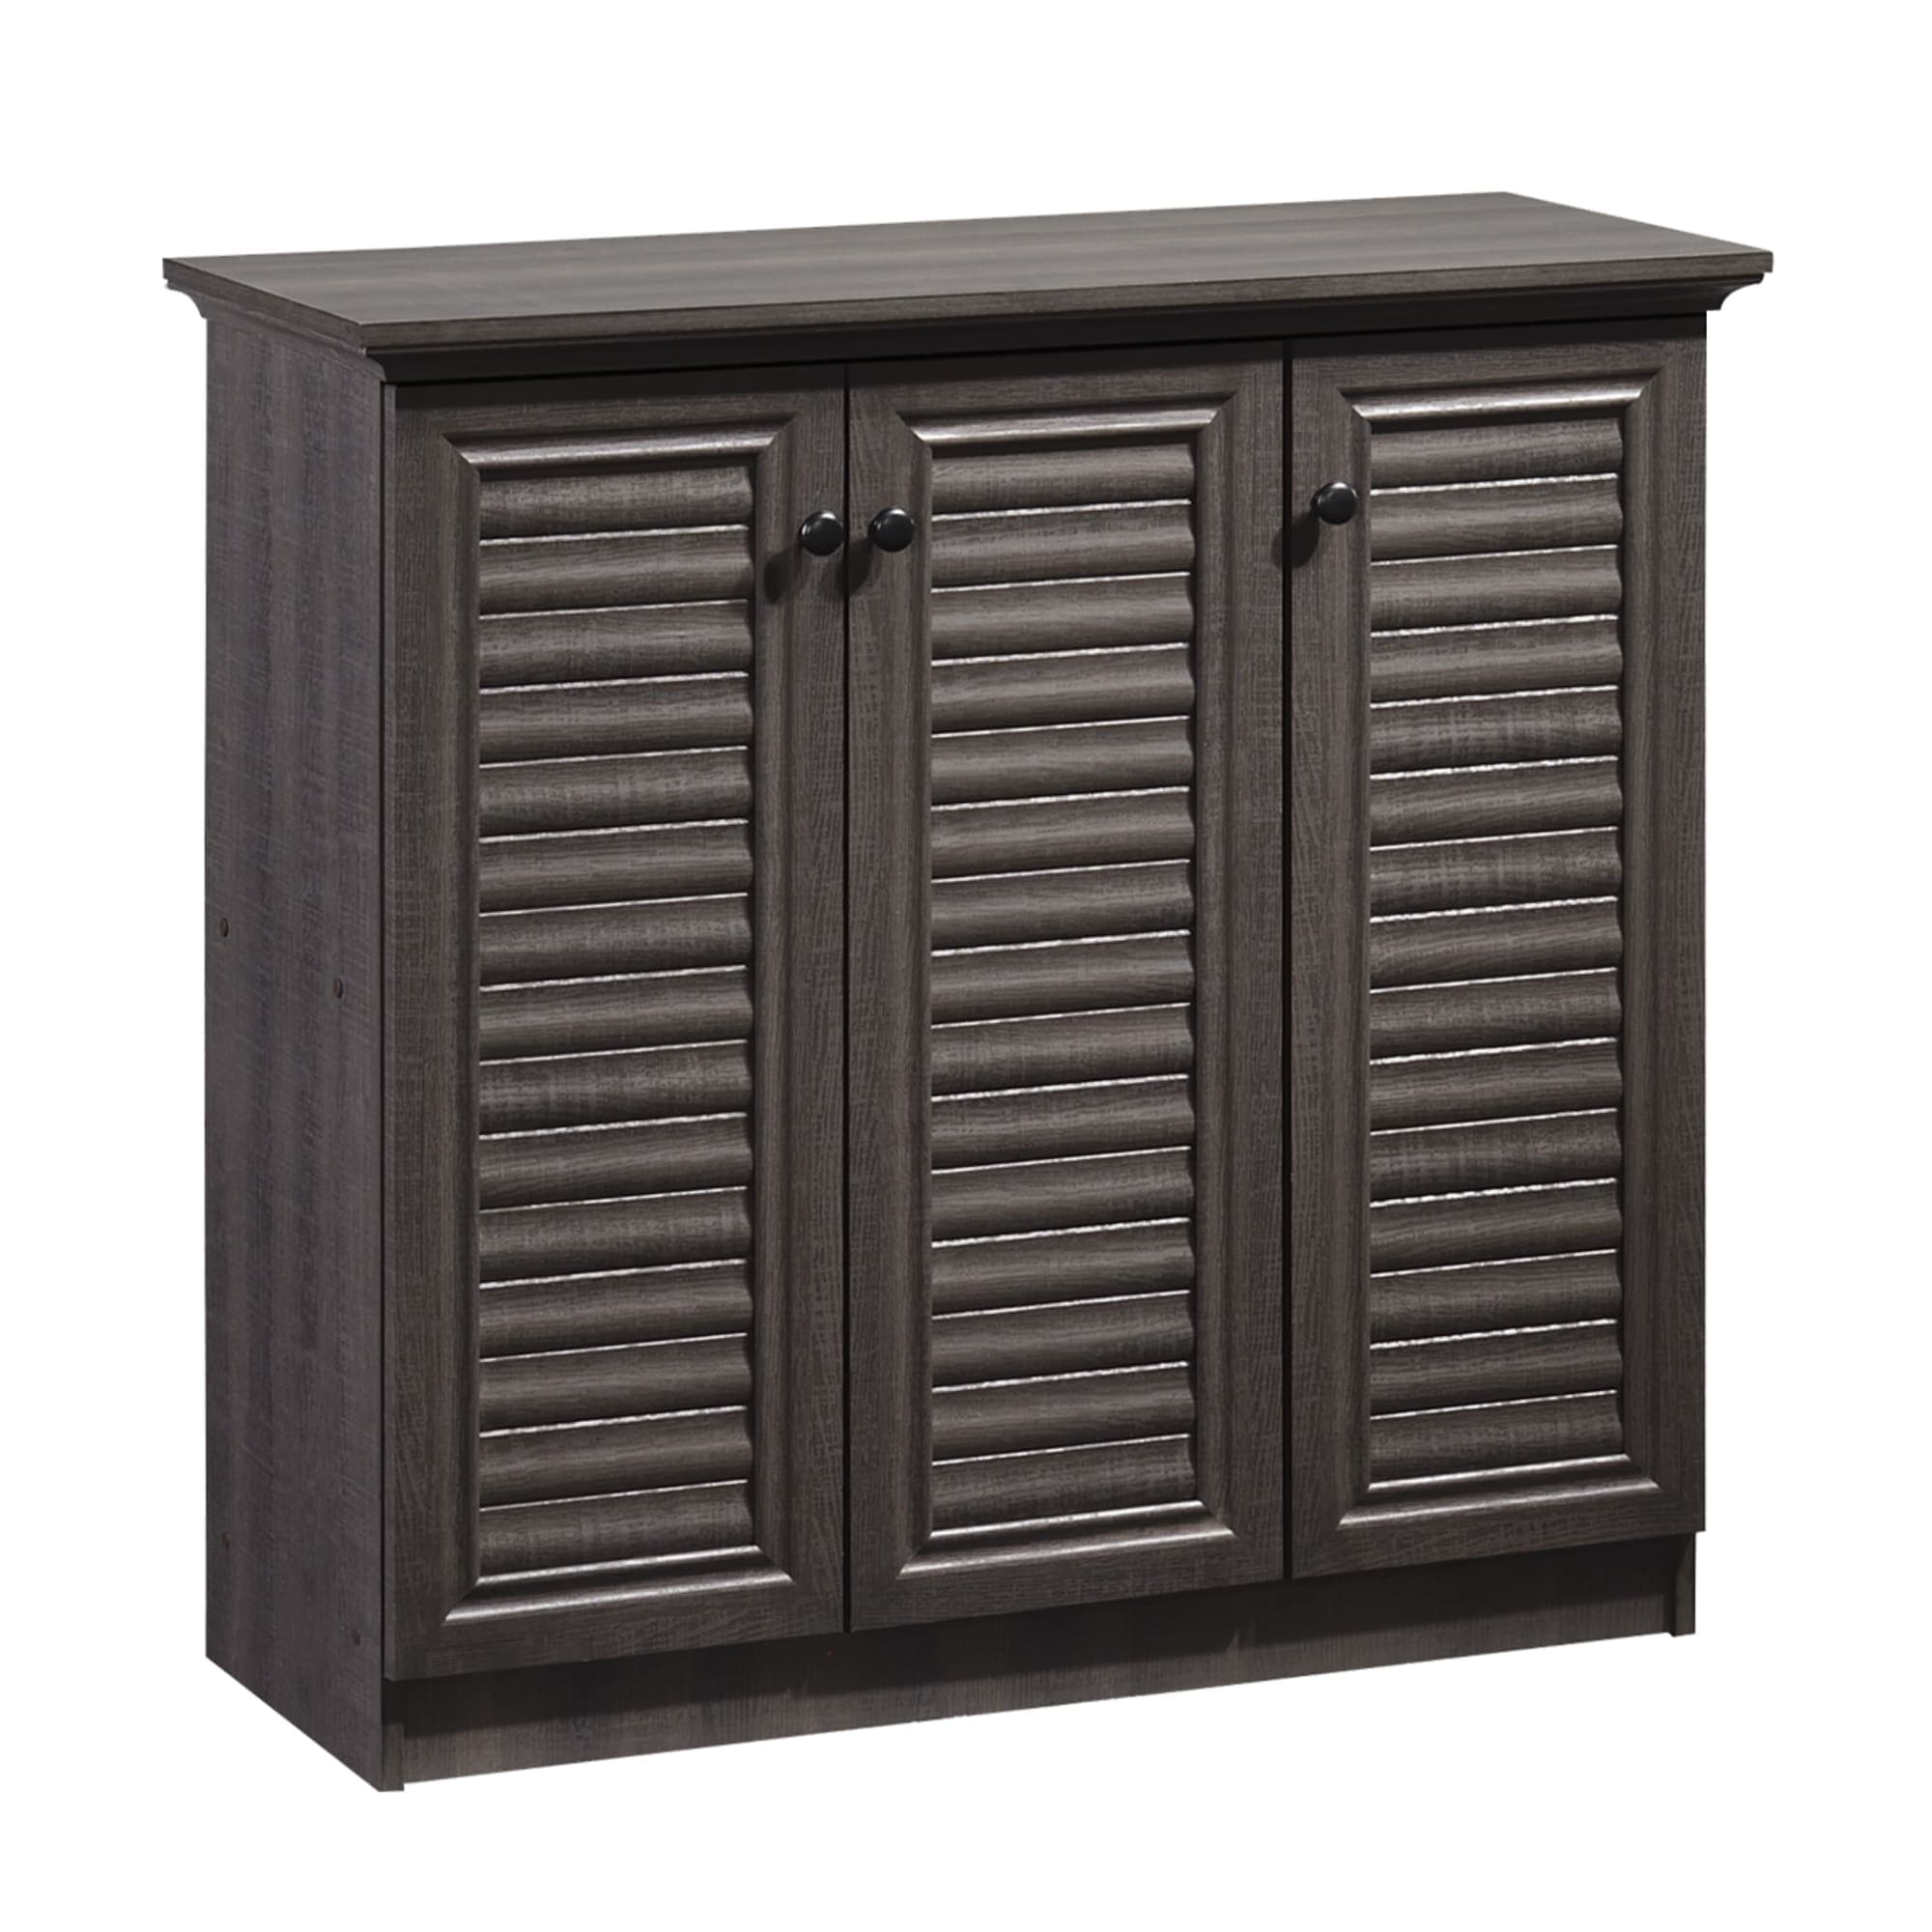 Home Basics 4 Tier Wide Shoe Cabinet with Louvered Doors, Ash $125.00 EACH, CASE PACK OF 1